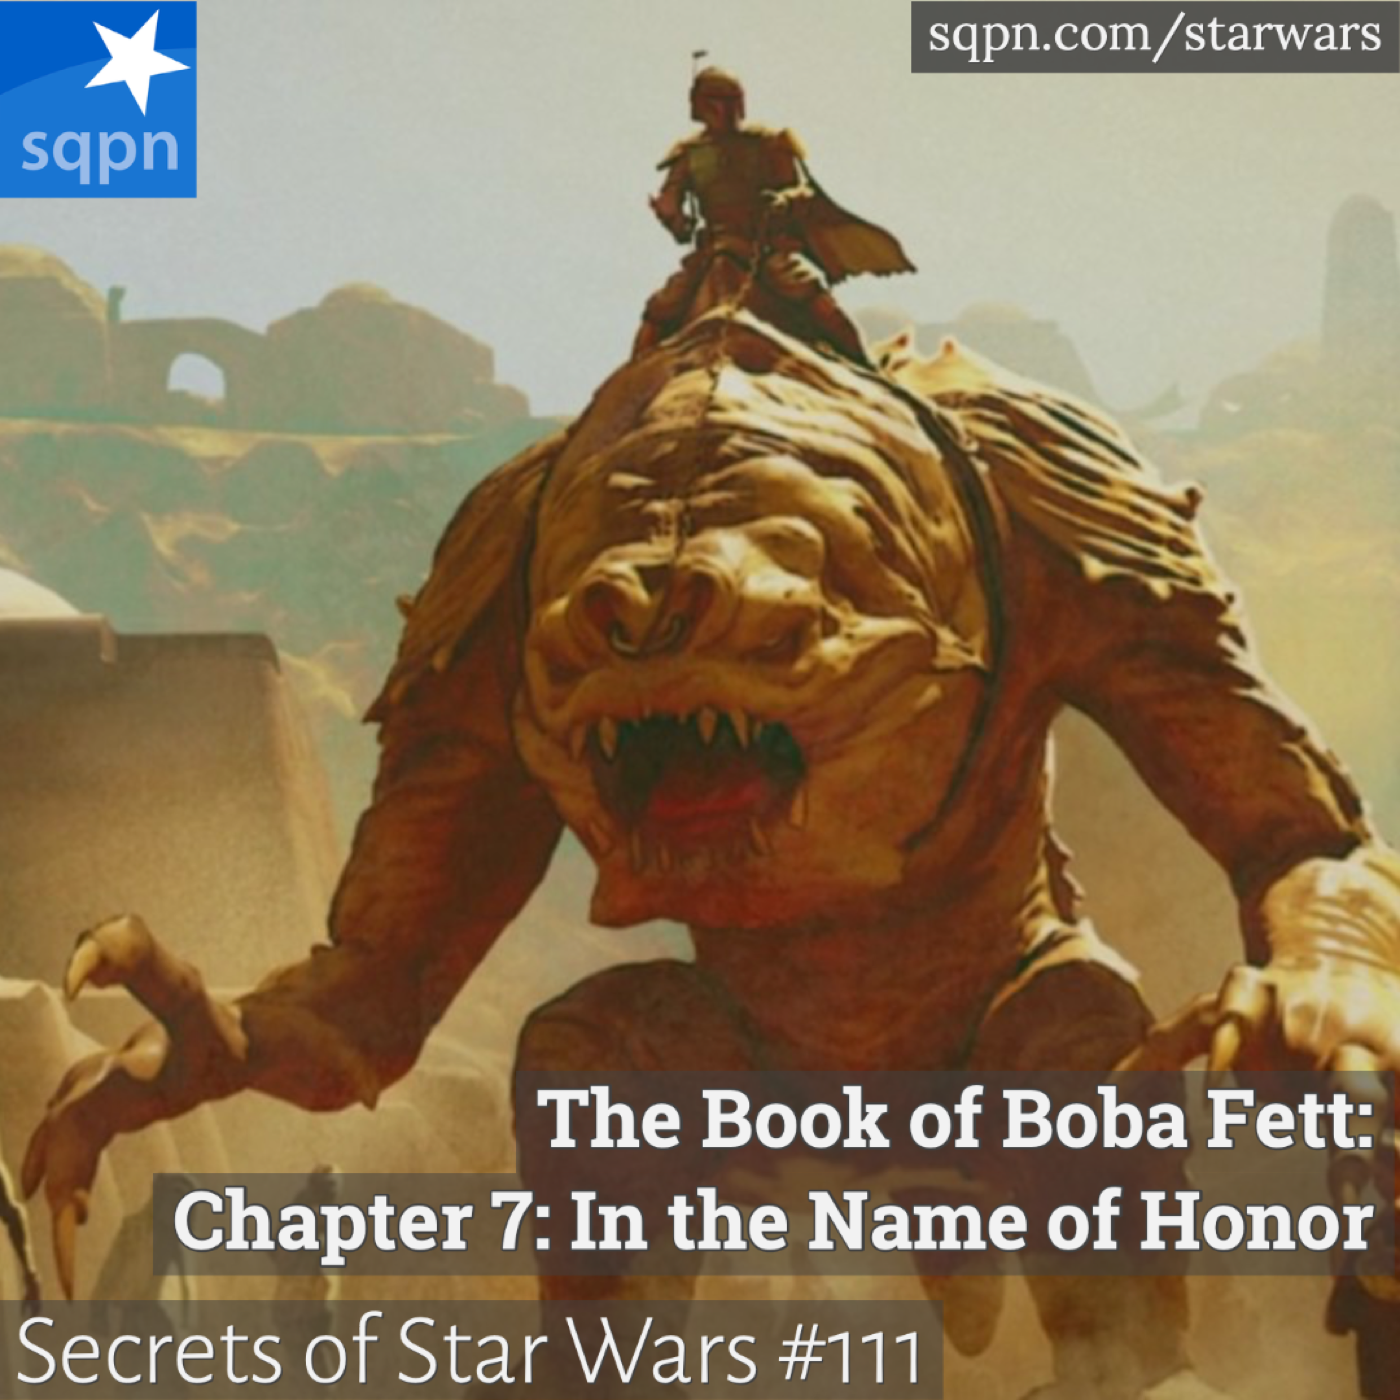 The Book of Boba Fett, Chapter 7: In the Name of Honor